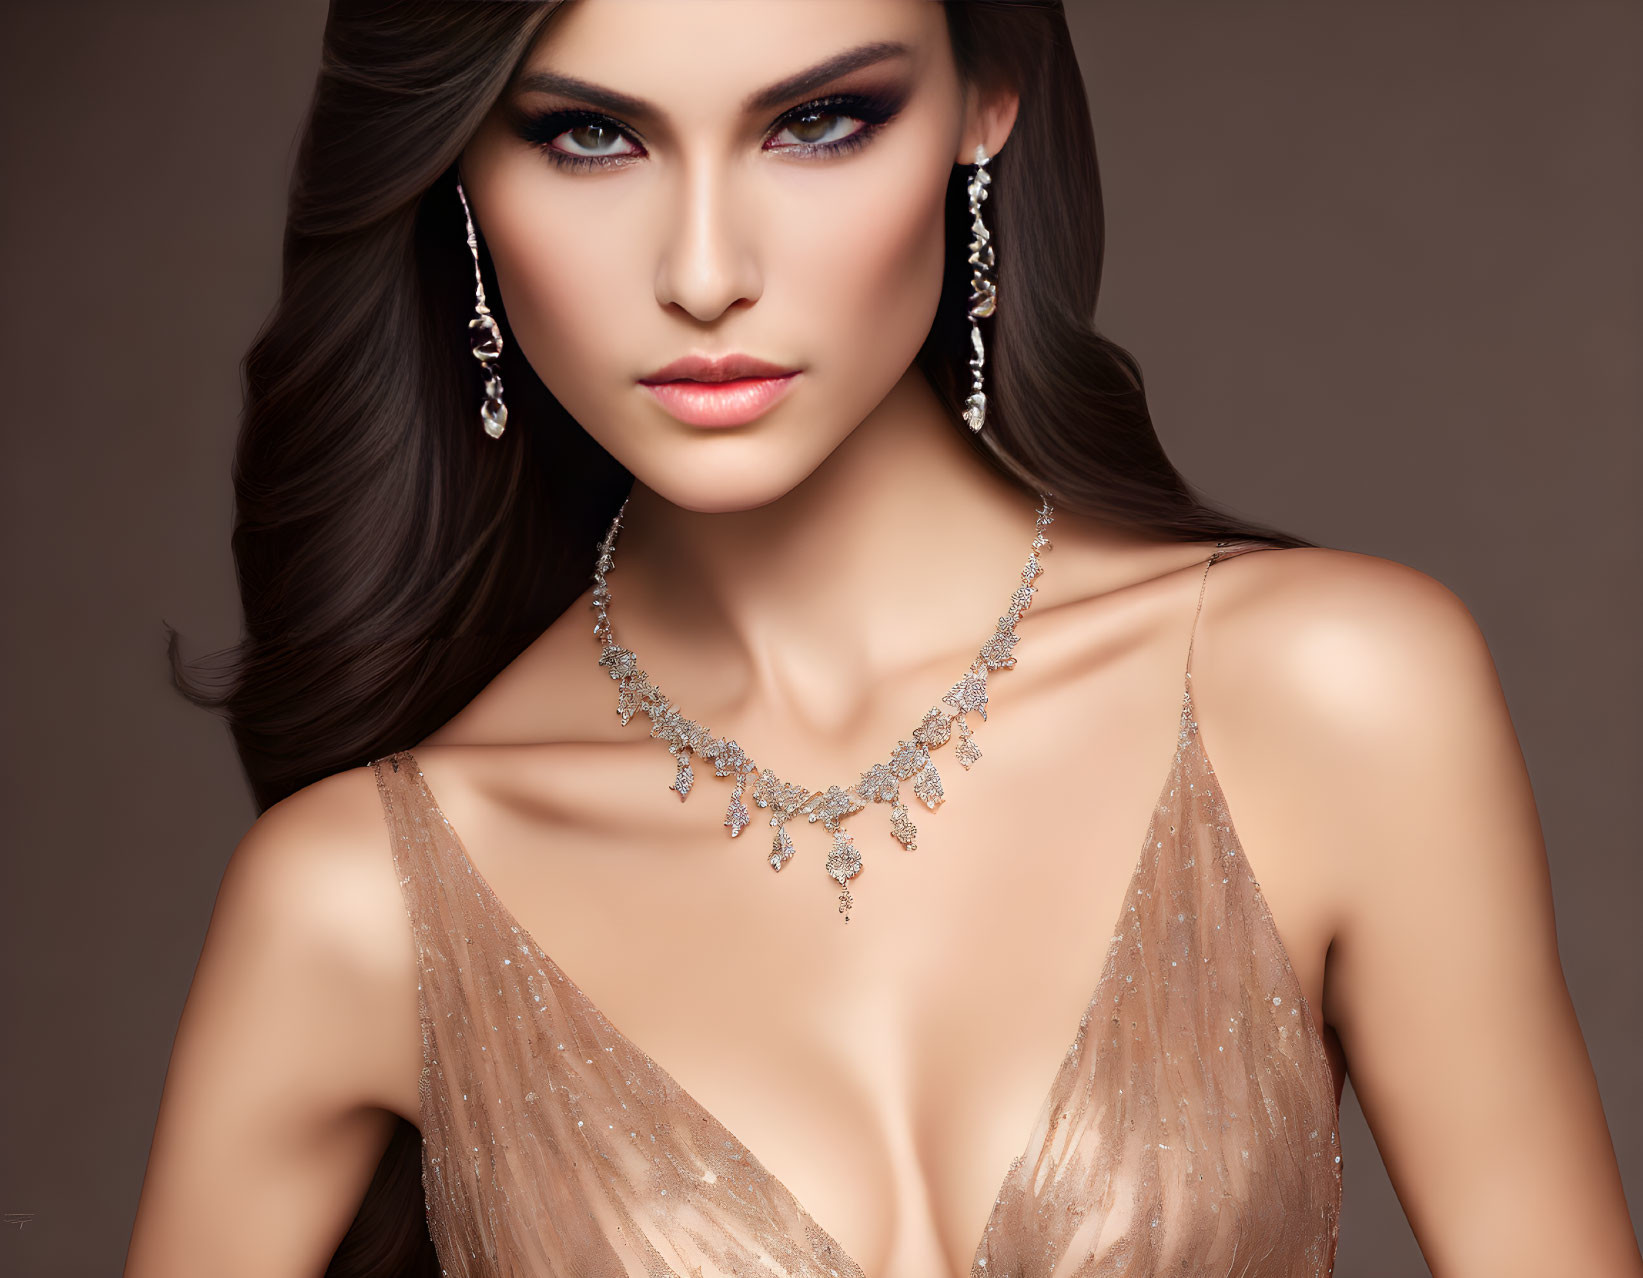 Woman with Long Brown Hair in Sparkly Beige Dress & Diamond Jewelry